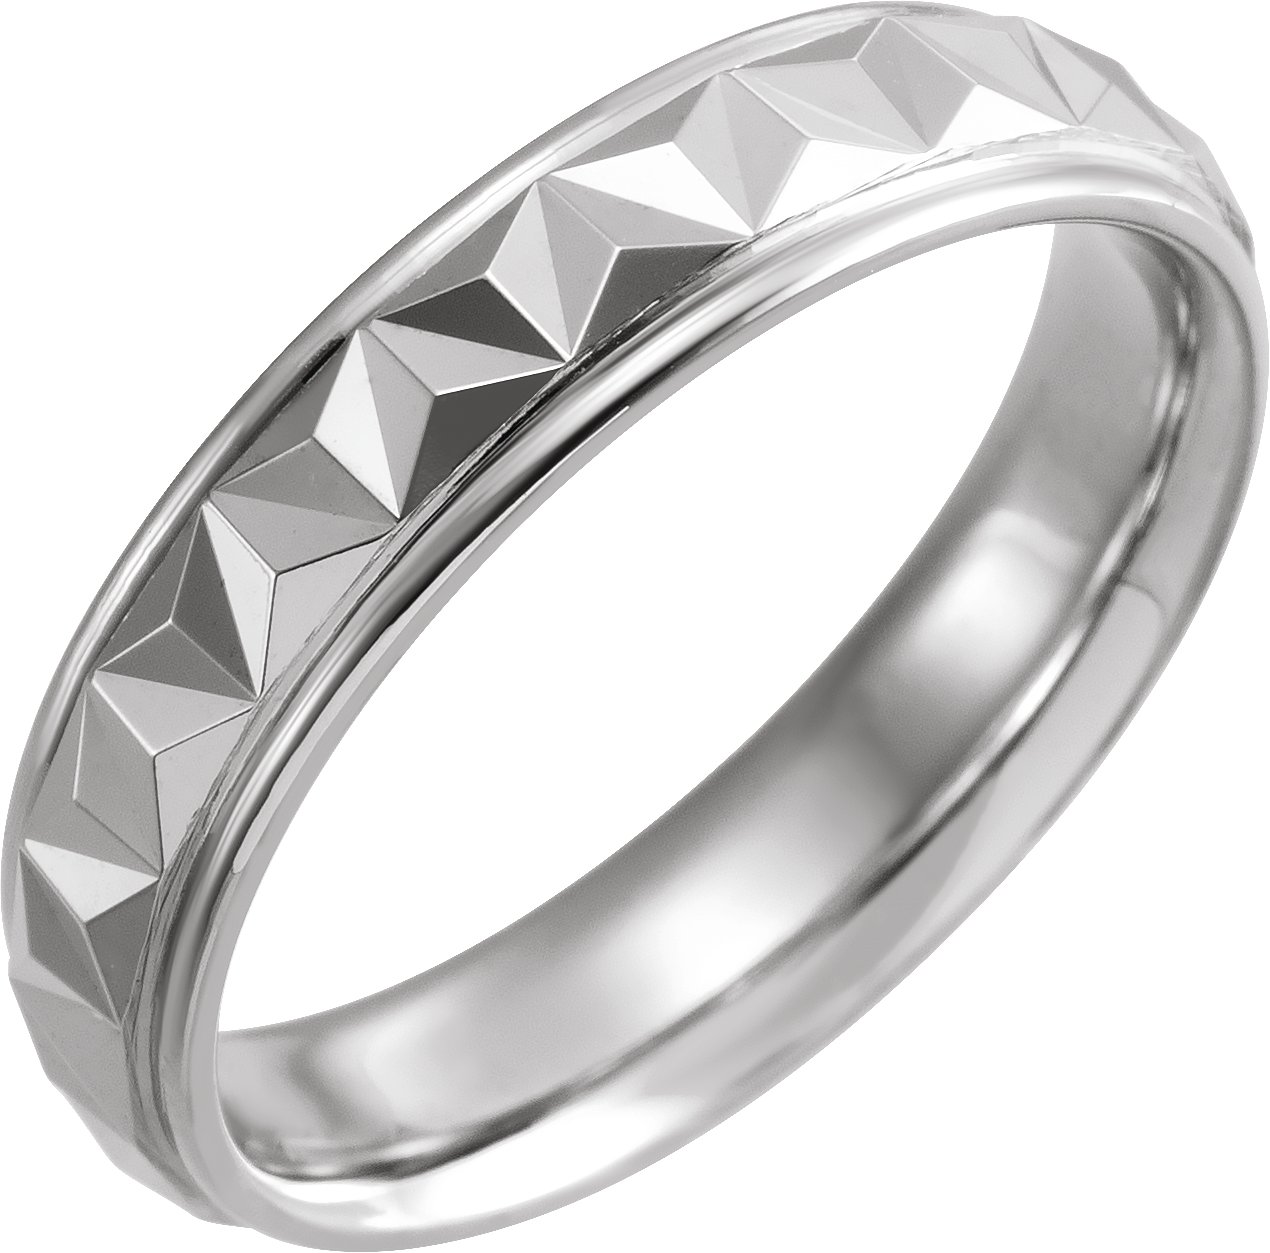 Continuum Sterling Silver 5 mm Geometric Band with Polished Finish Size 18.5